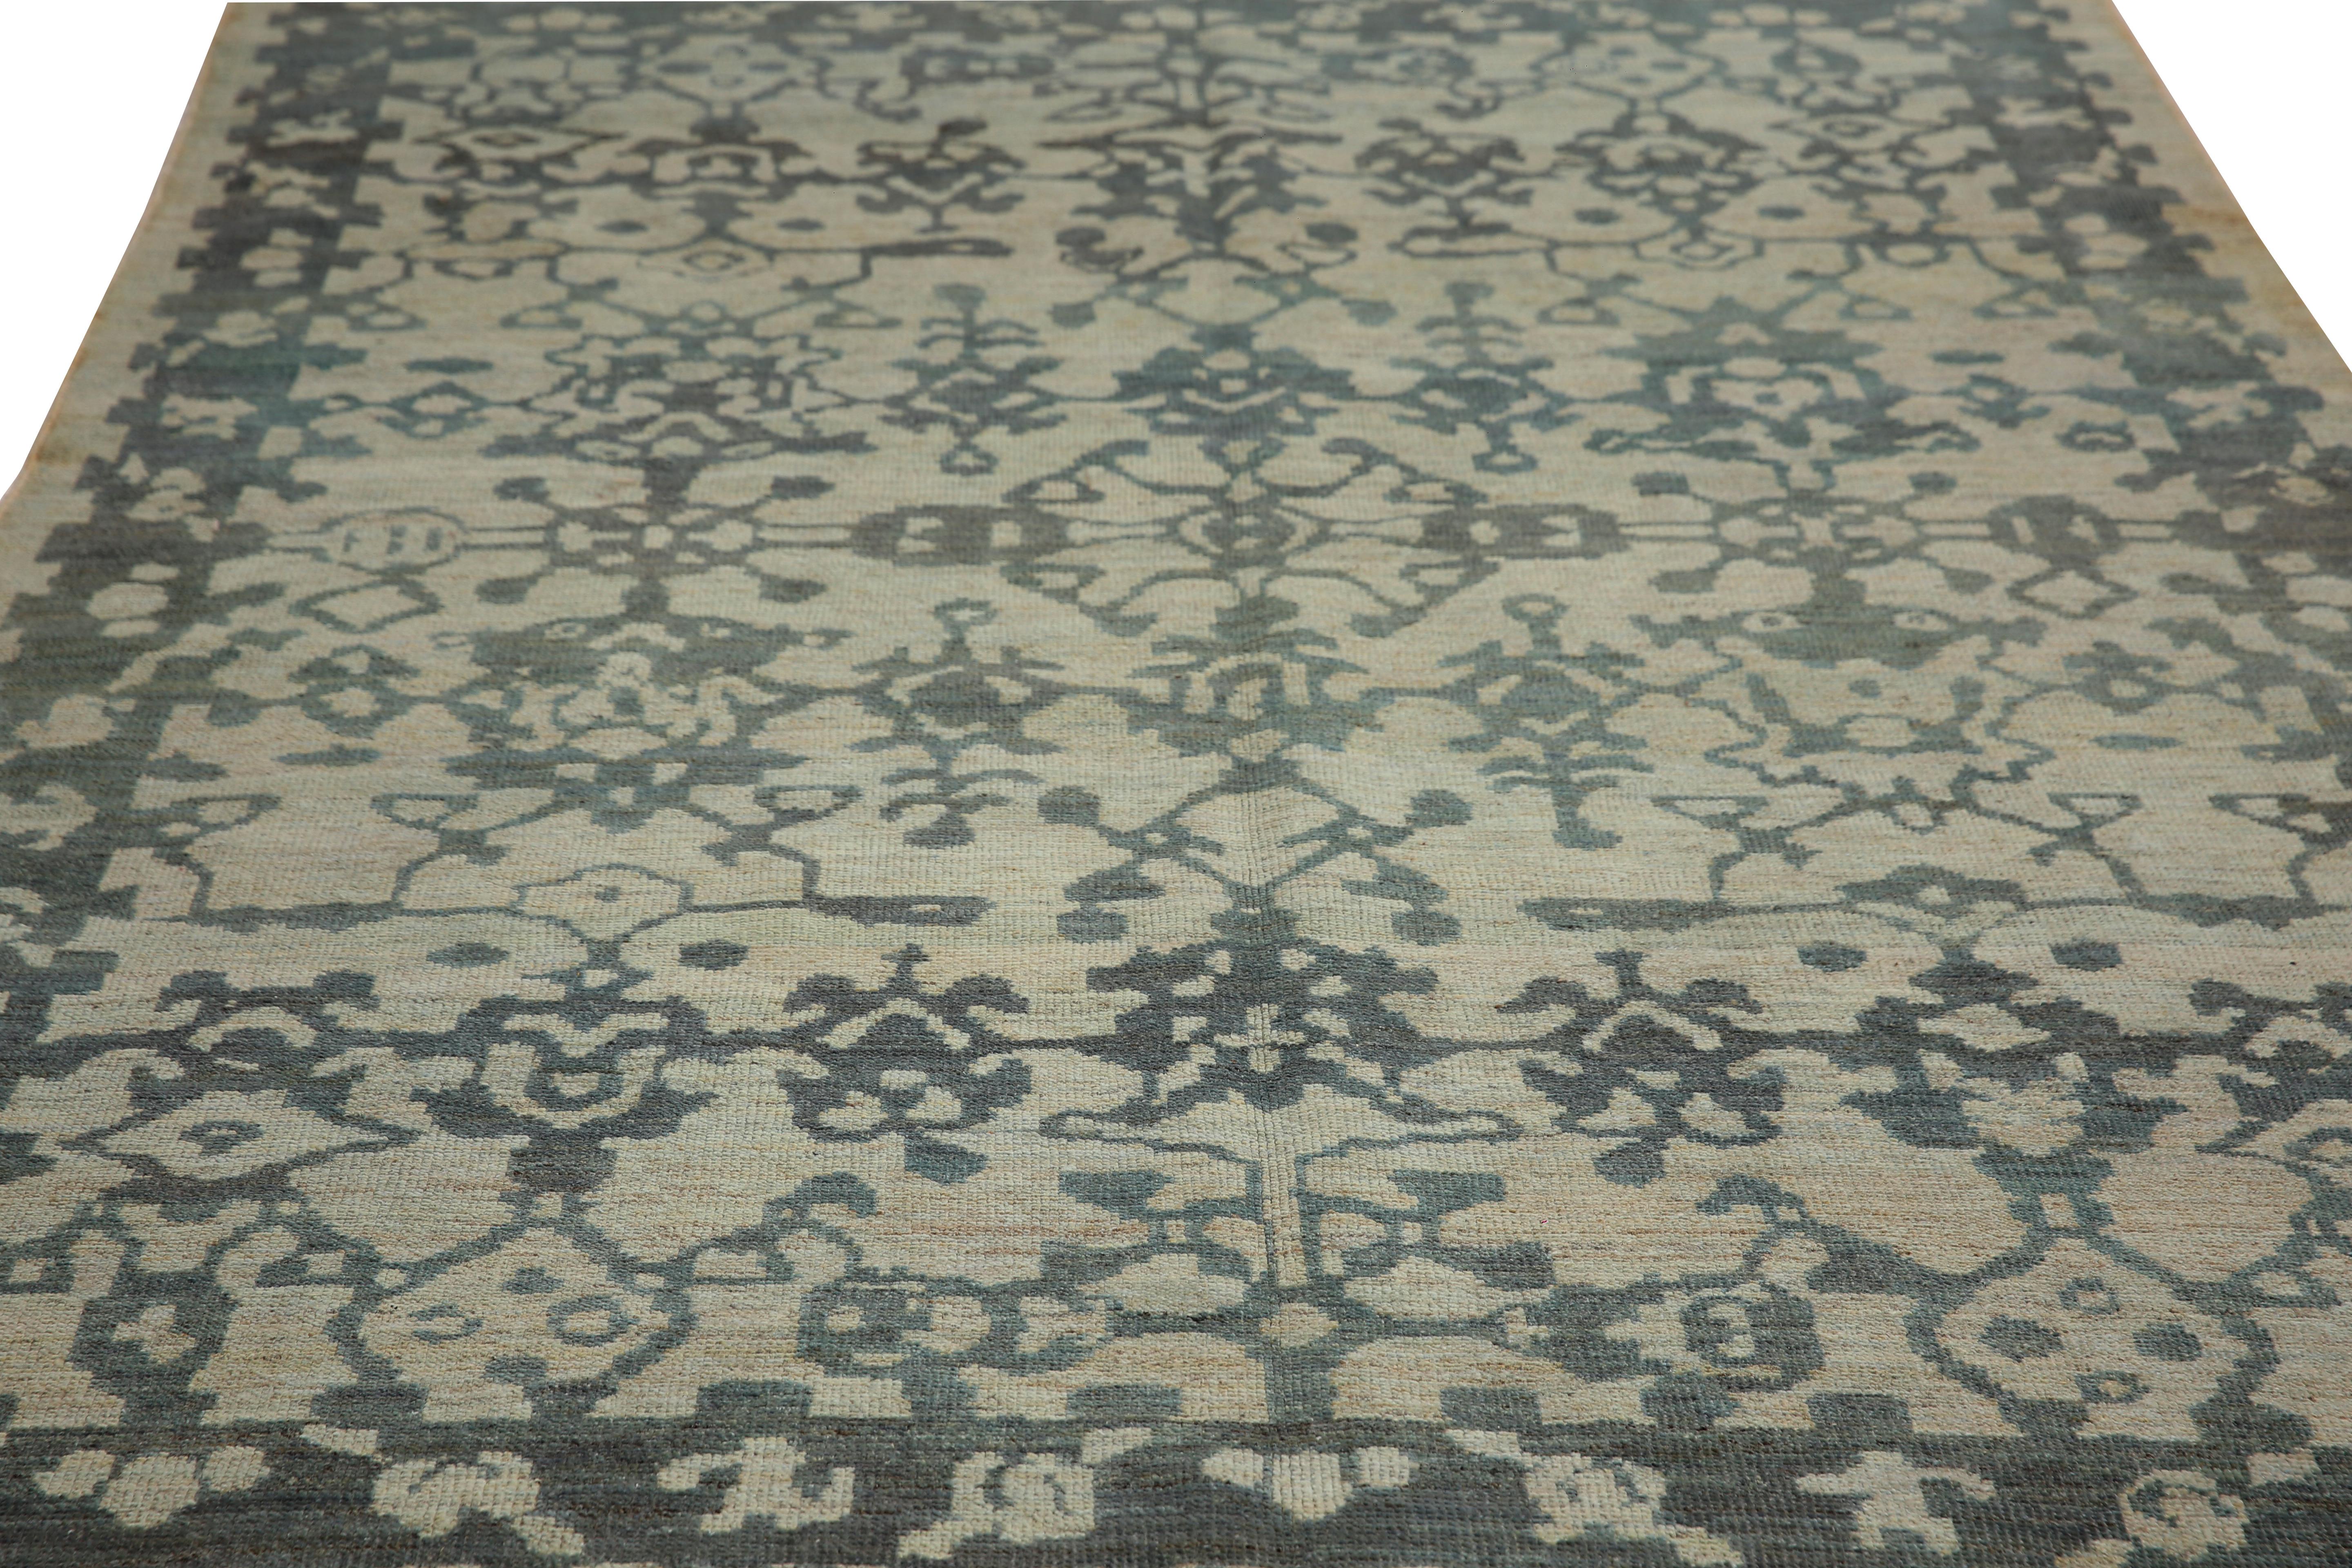 Luxurious Handmade Sultanabad Rug - Transitional Design, Blue Tones - 5'10'' x 8 For Sale 2